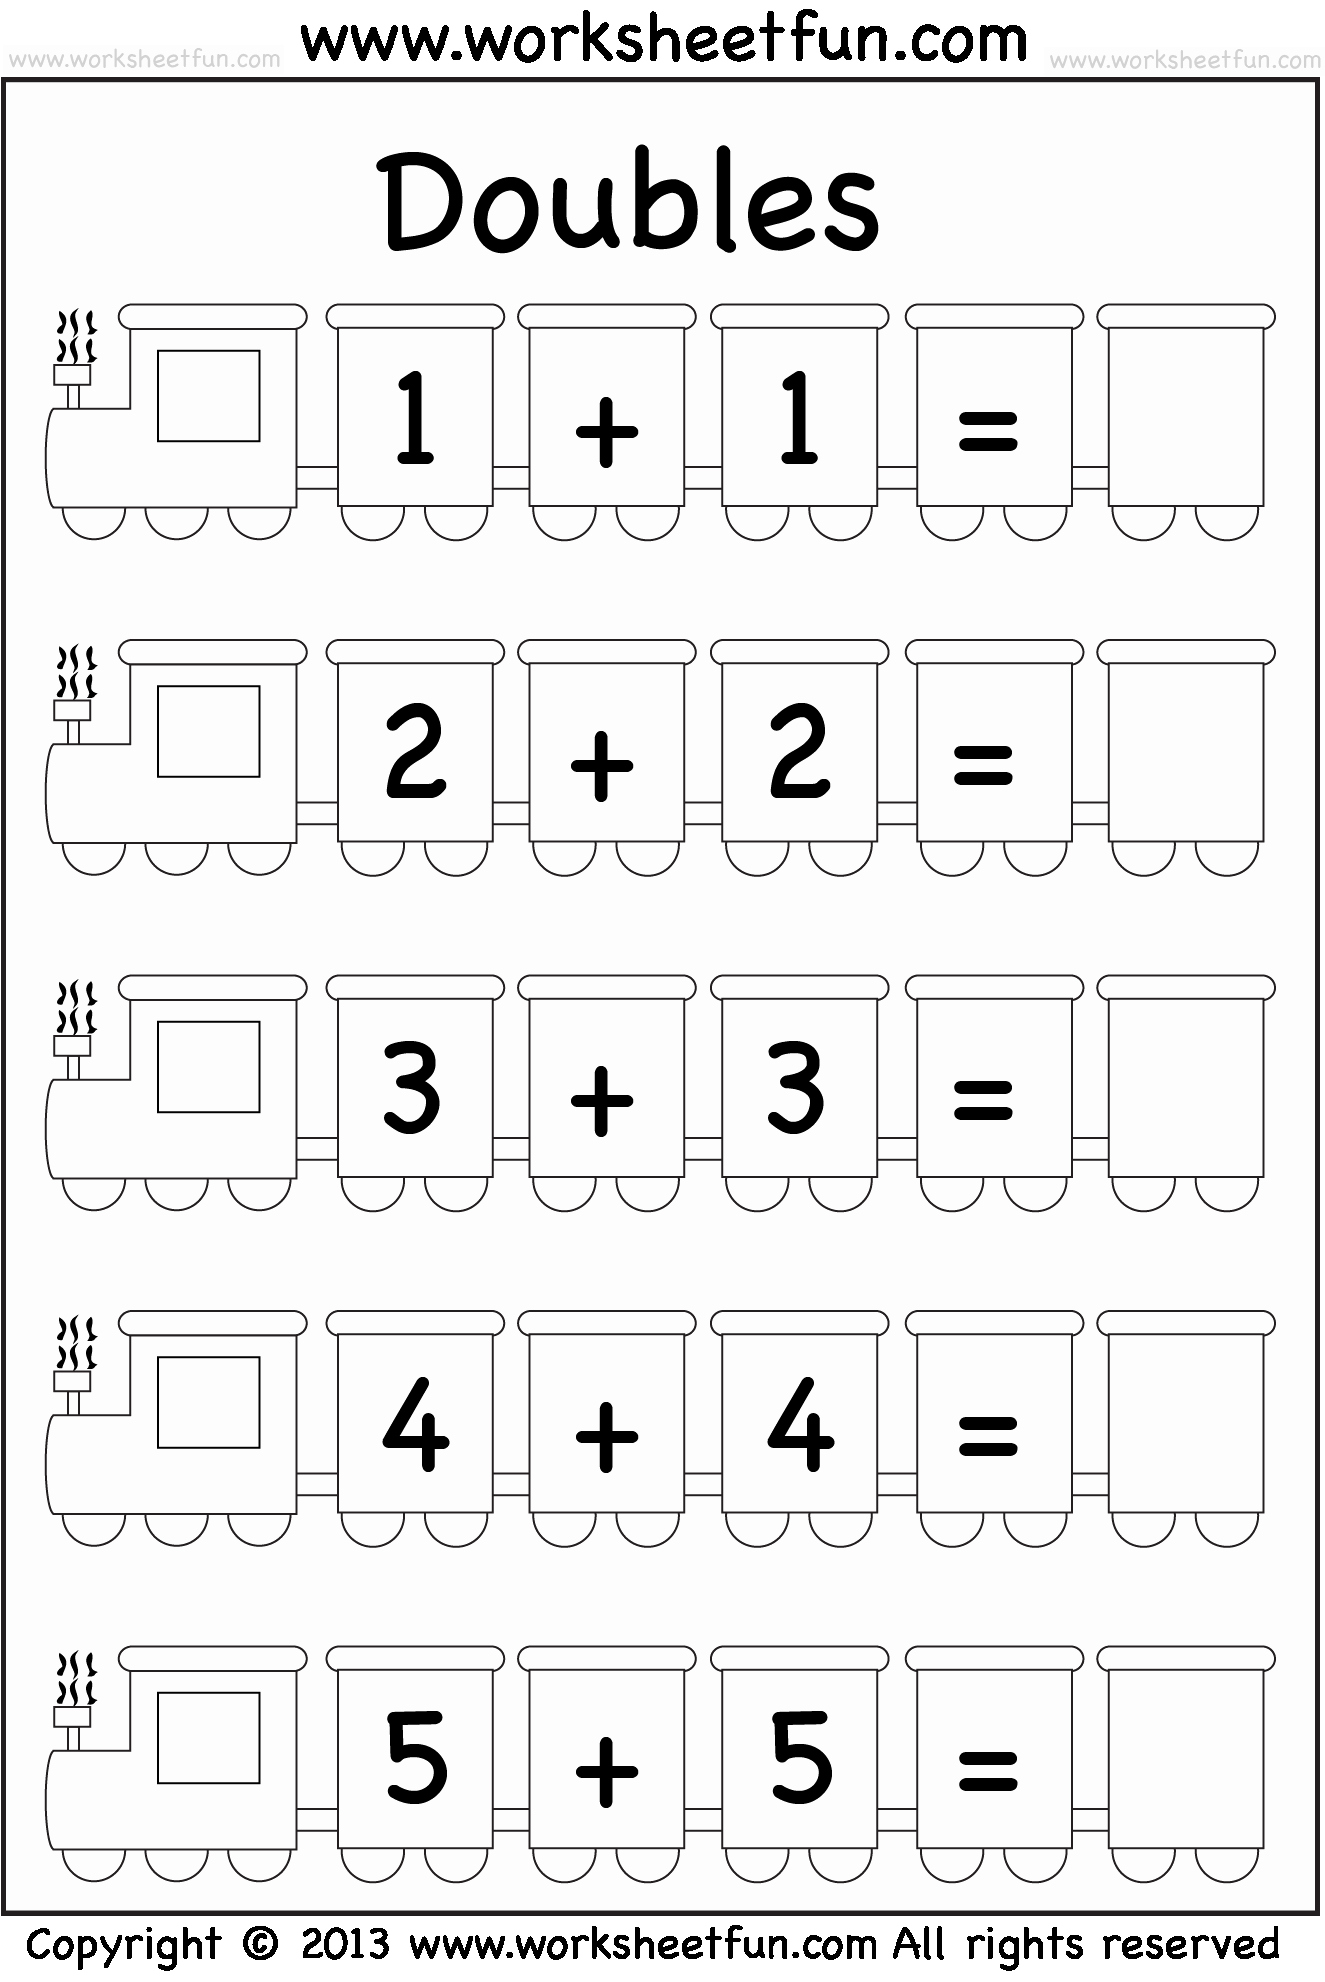 Double Facts Worksheets Unique Addition Doubles – 1 Worksheet Free Printable Worksheets